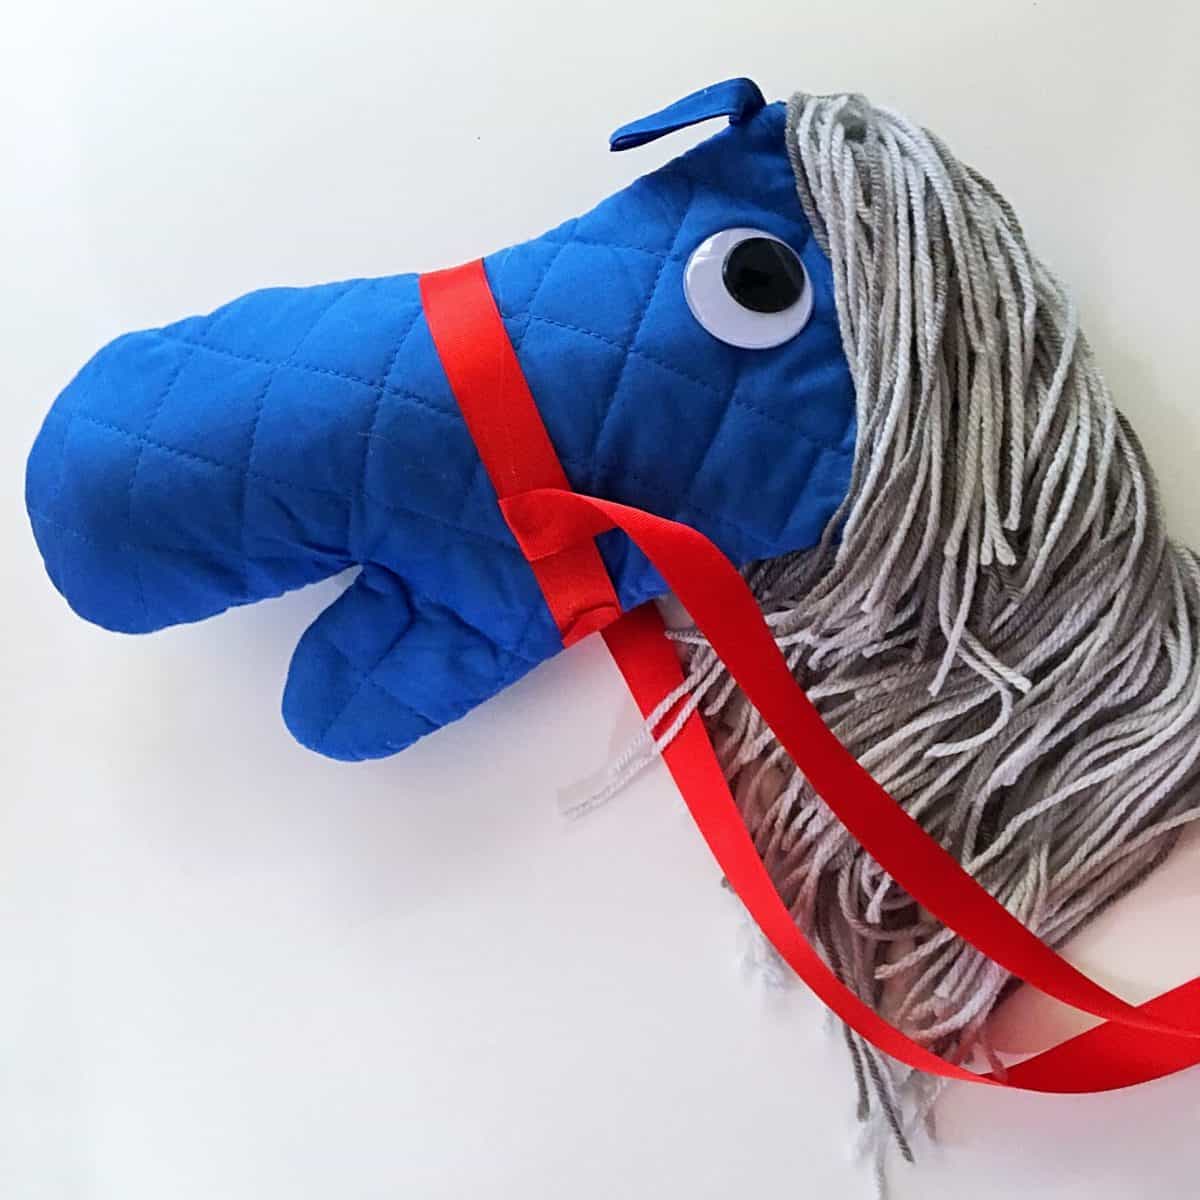 No Sew Stick Horse-Tutorial for creating diy horses with cheap supplies from the dollar store